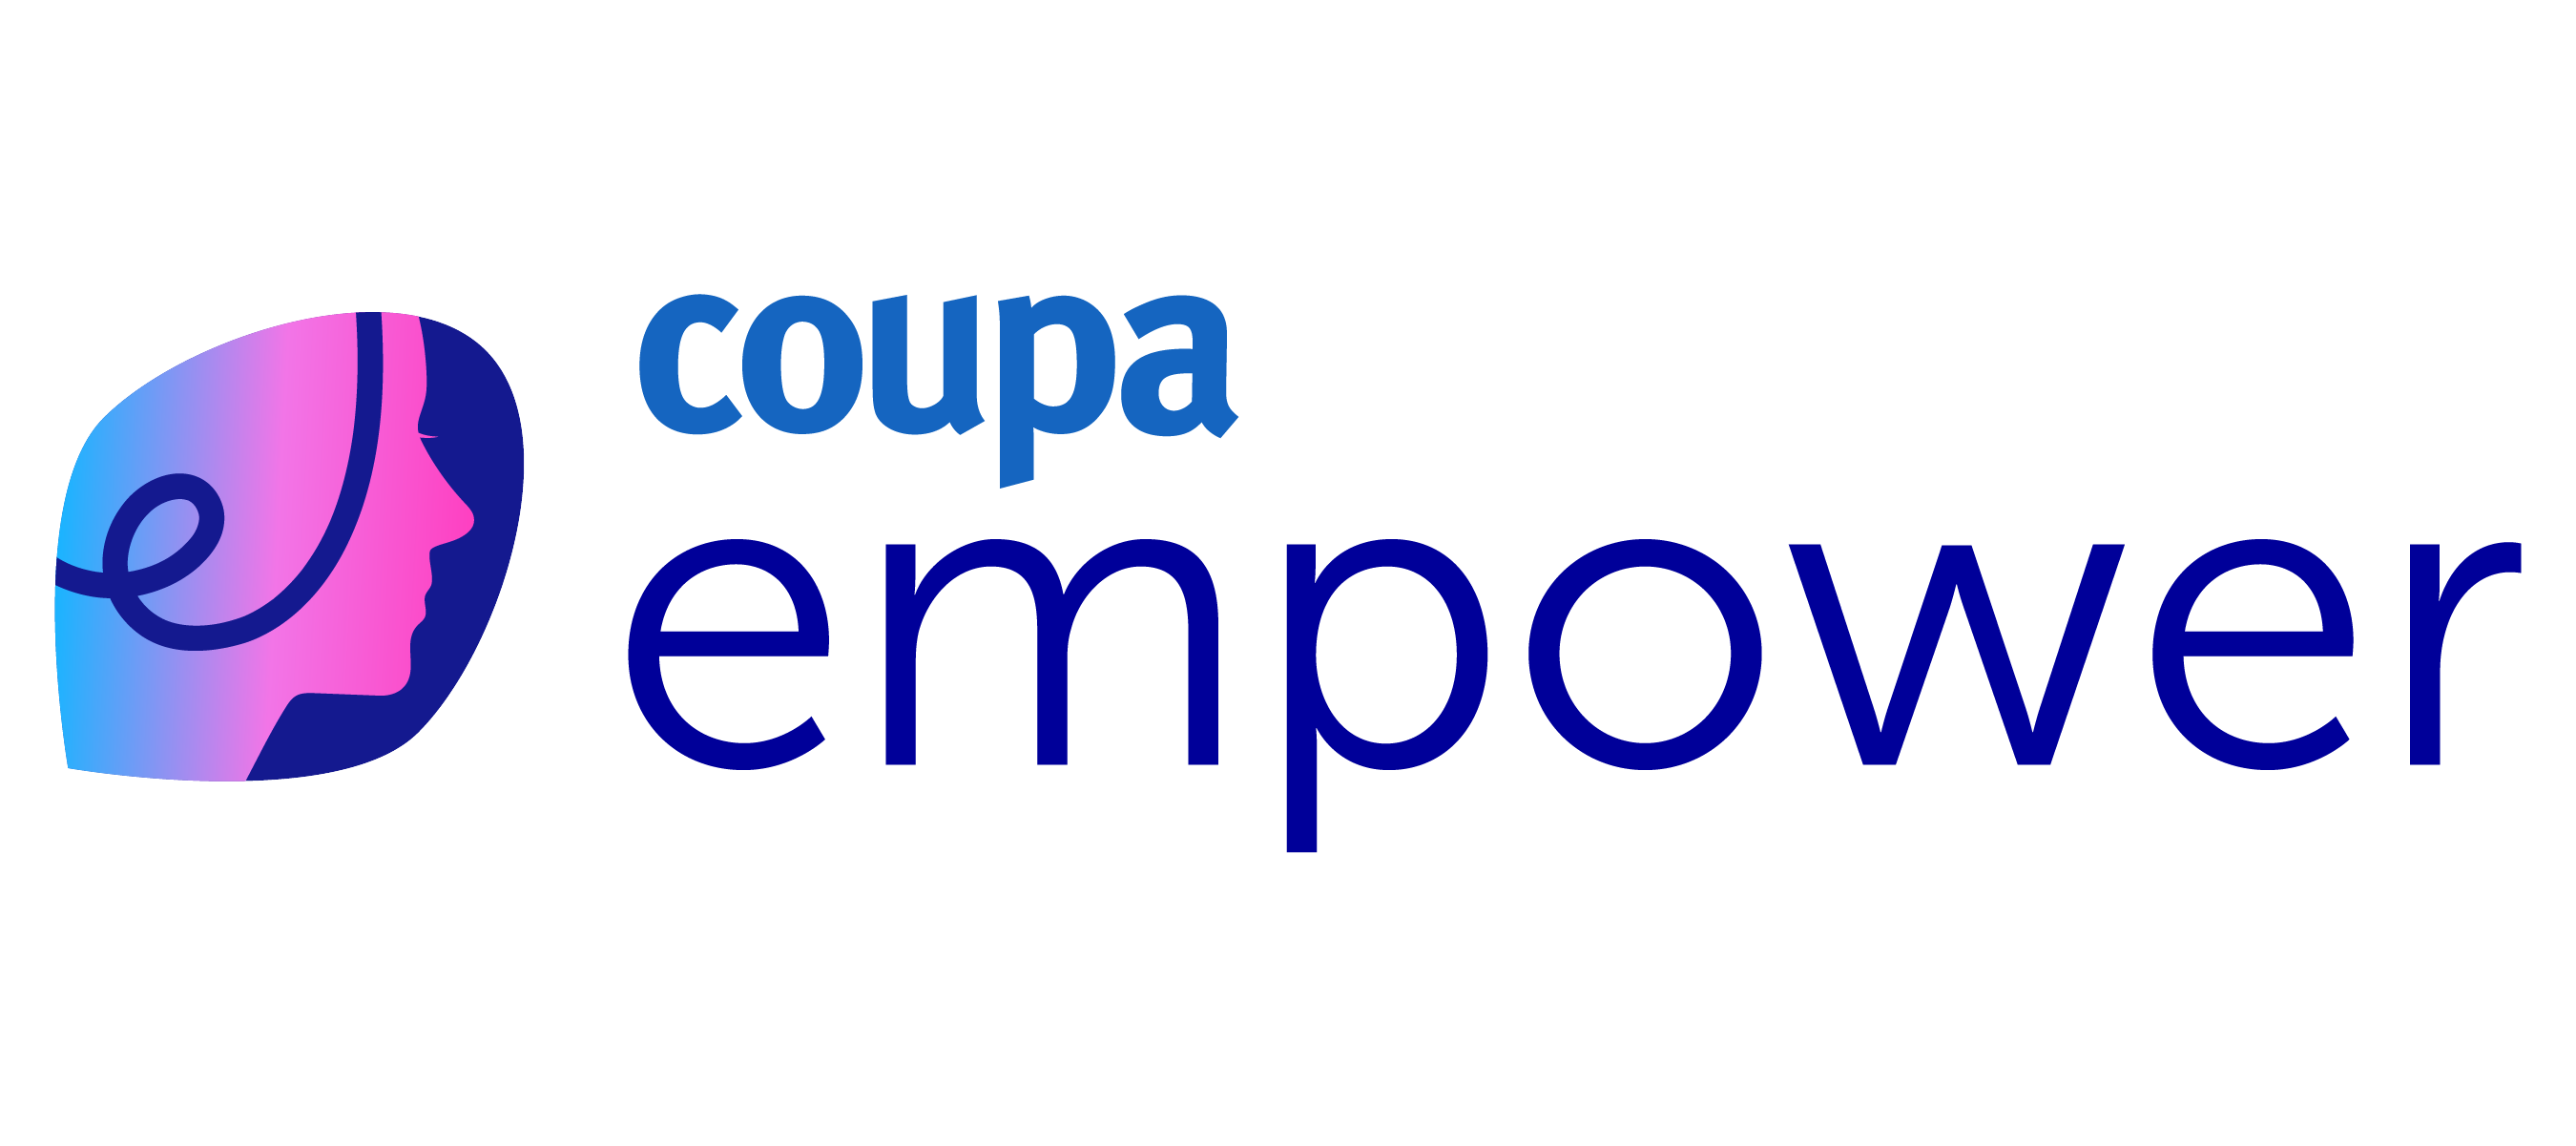 empower coupa